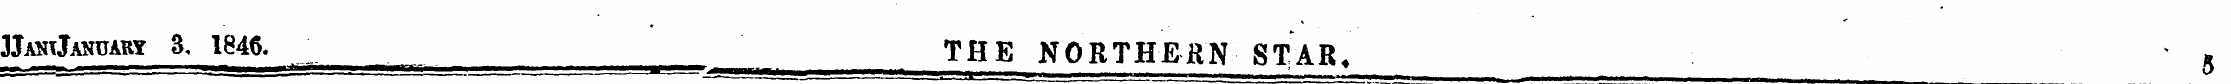 JtoqANPARY 3, 1846. THE NORTHERN STAR, 5